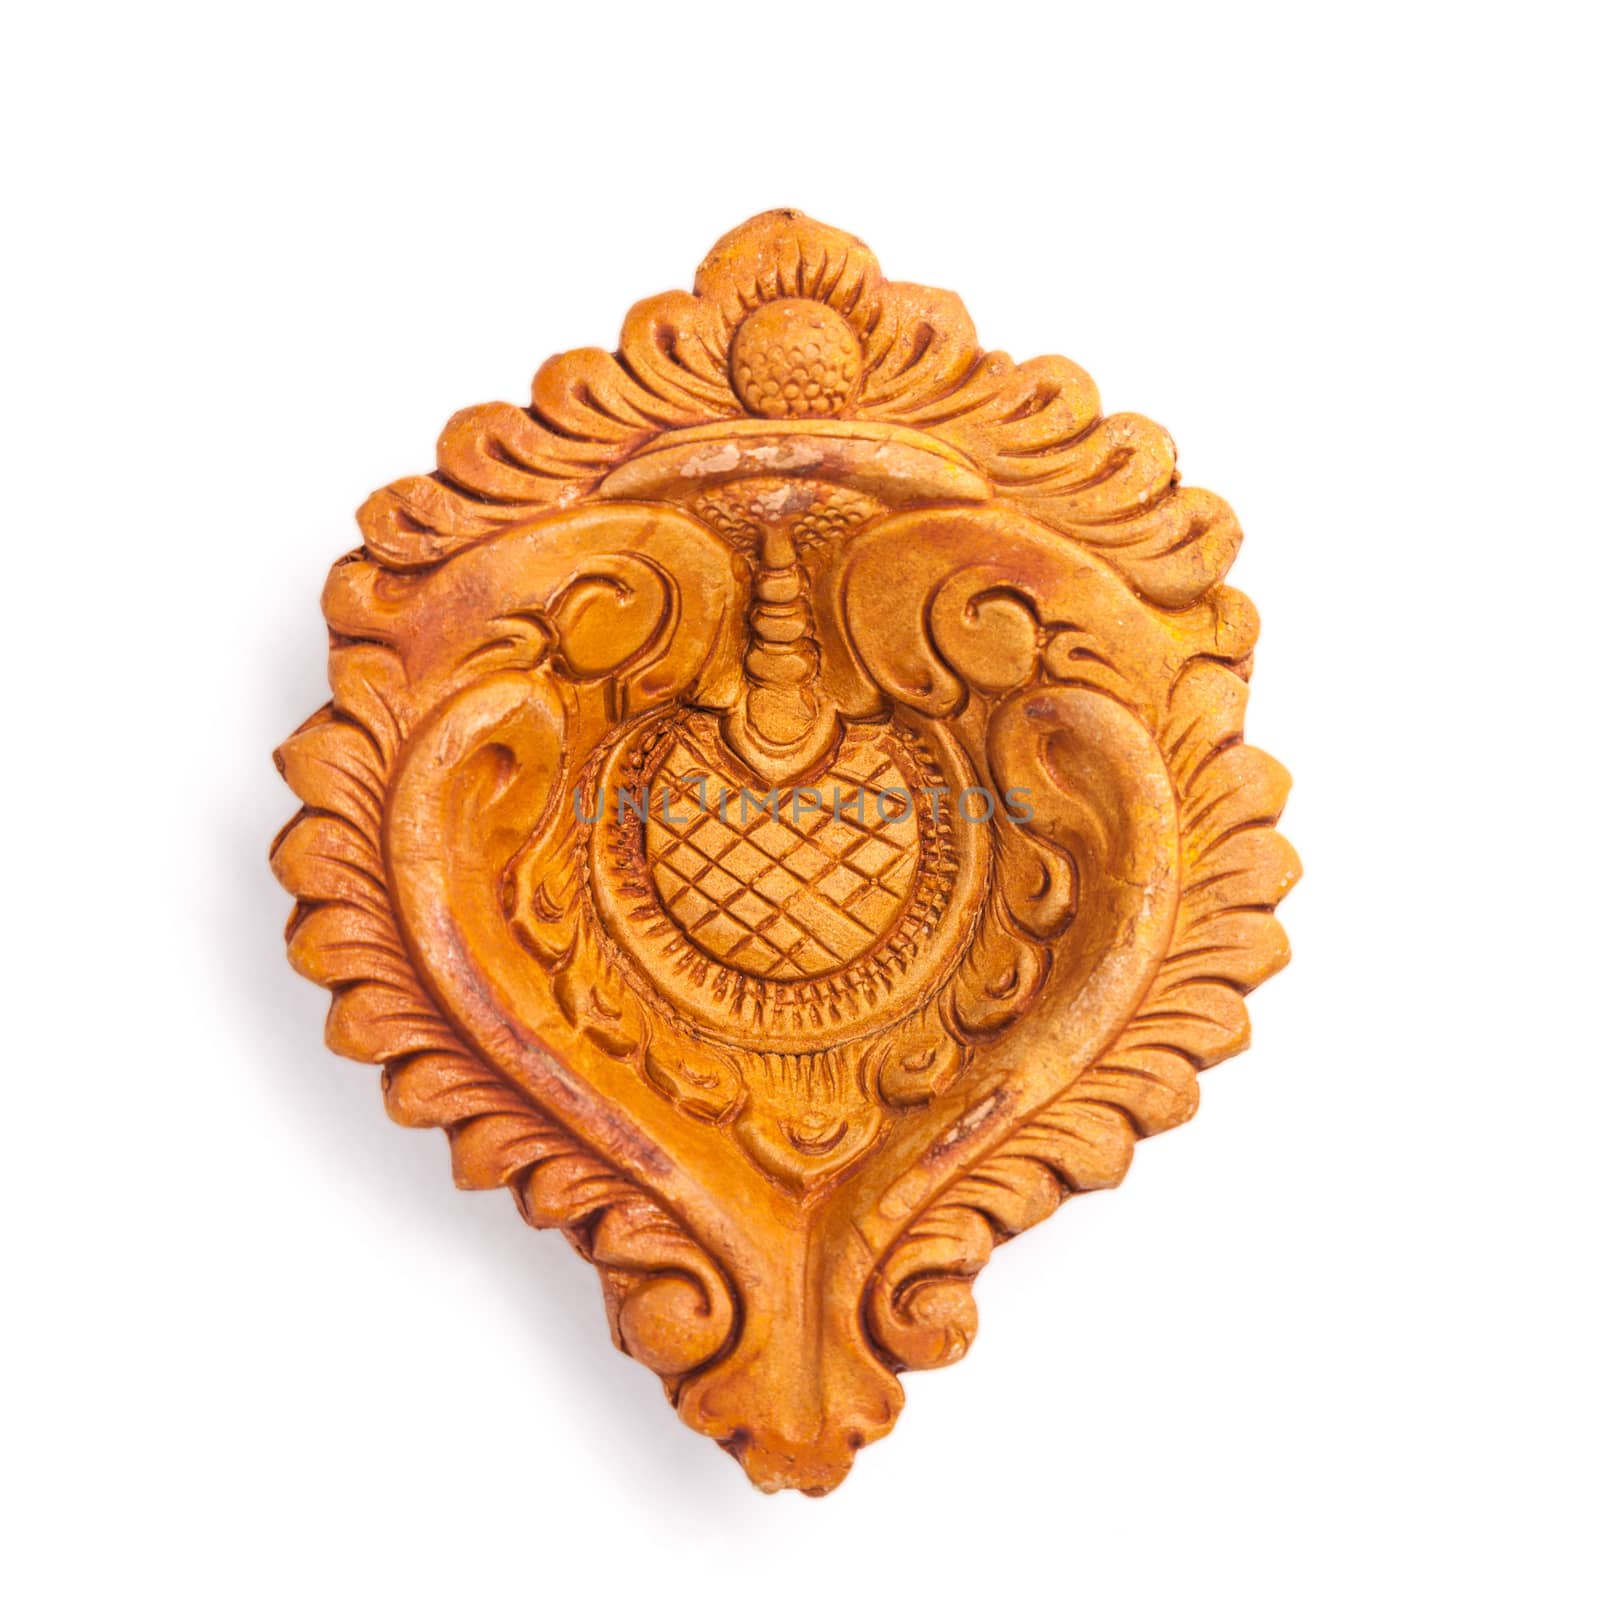 Top view of a beautifully carved designer handmade clay lamp isolated on white background.